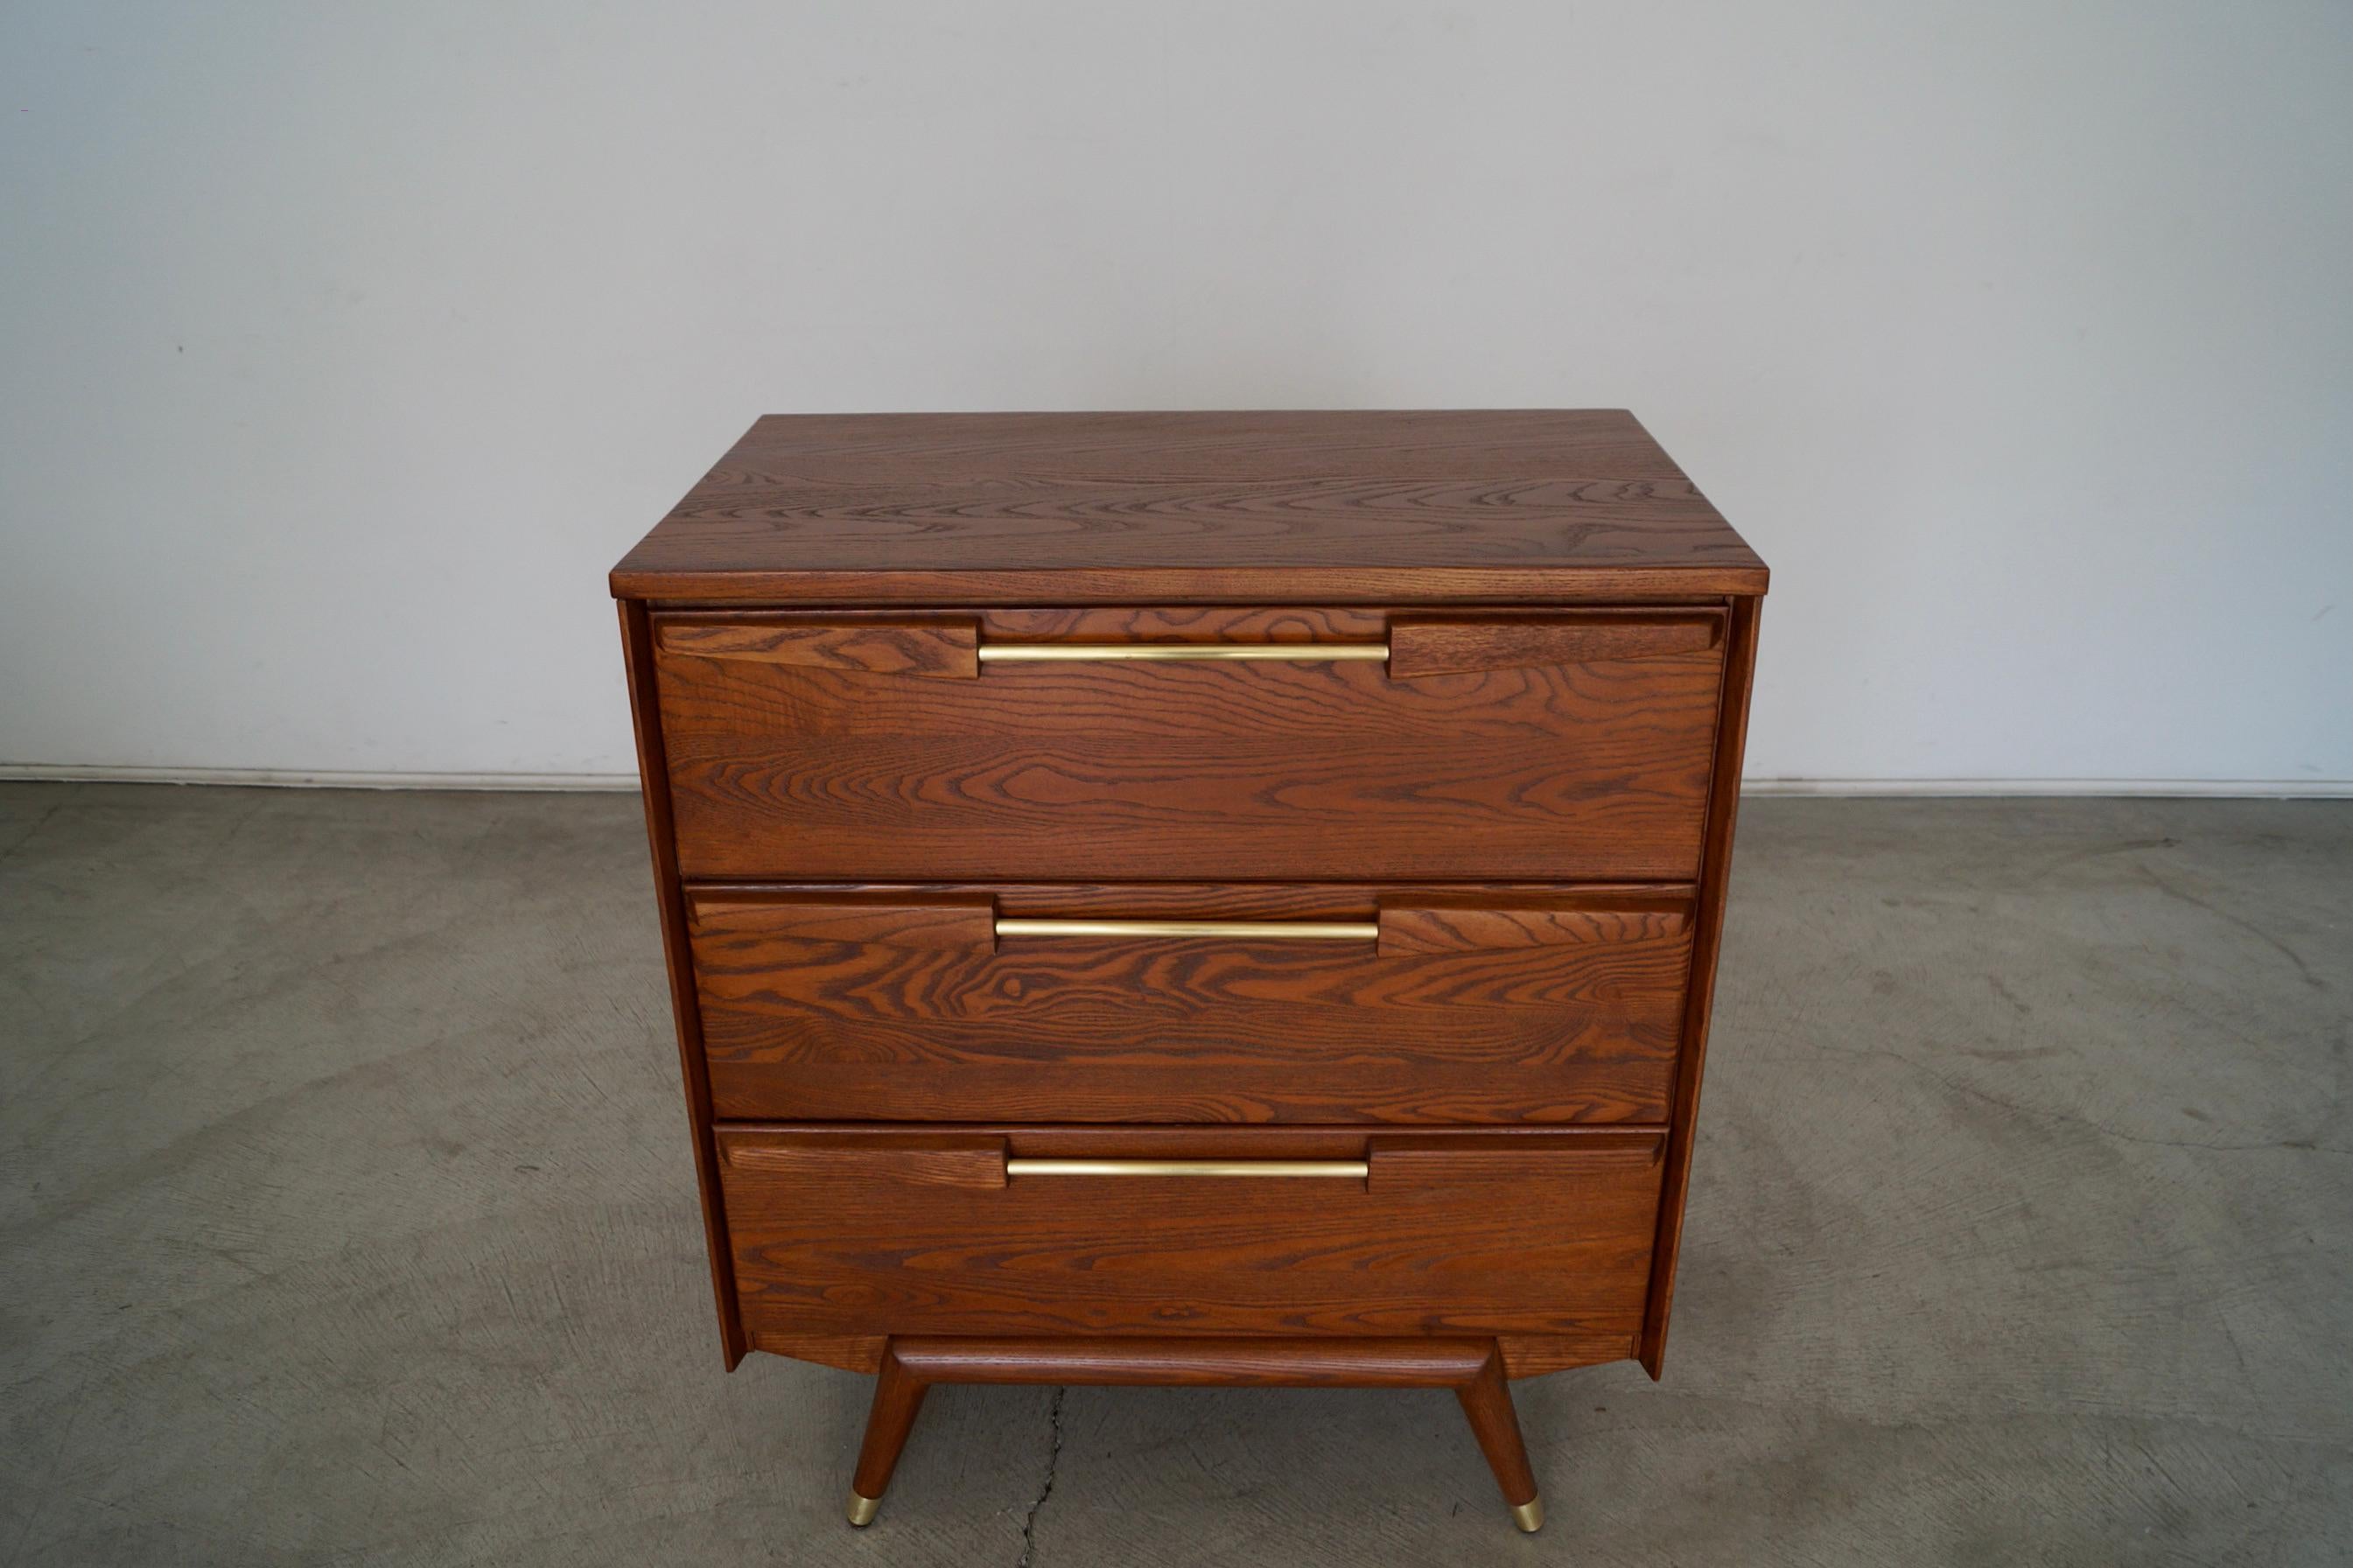 1950's Mid-Century Modern Dresser W/ Metal Drawers In Excellent Condition For Sale In Burbank, CA